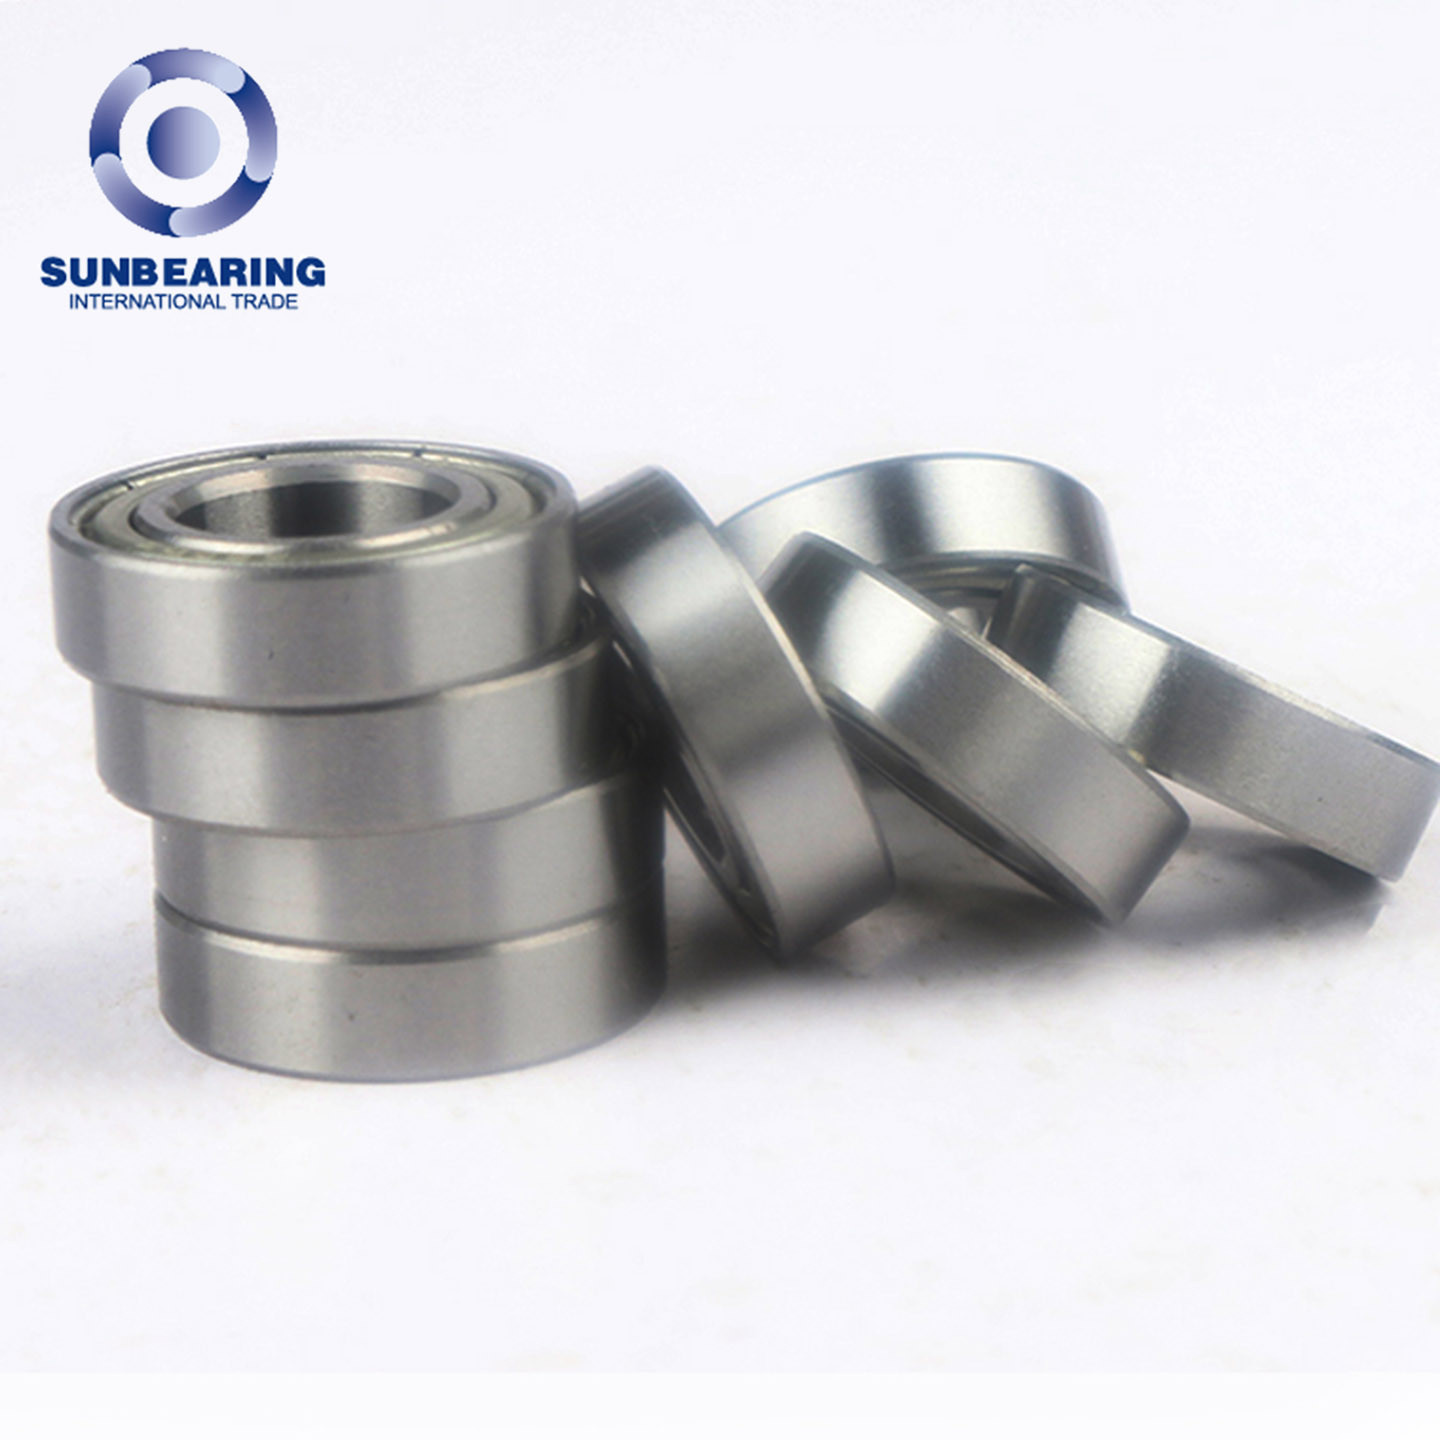 Q:What kind of bearings can you product